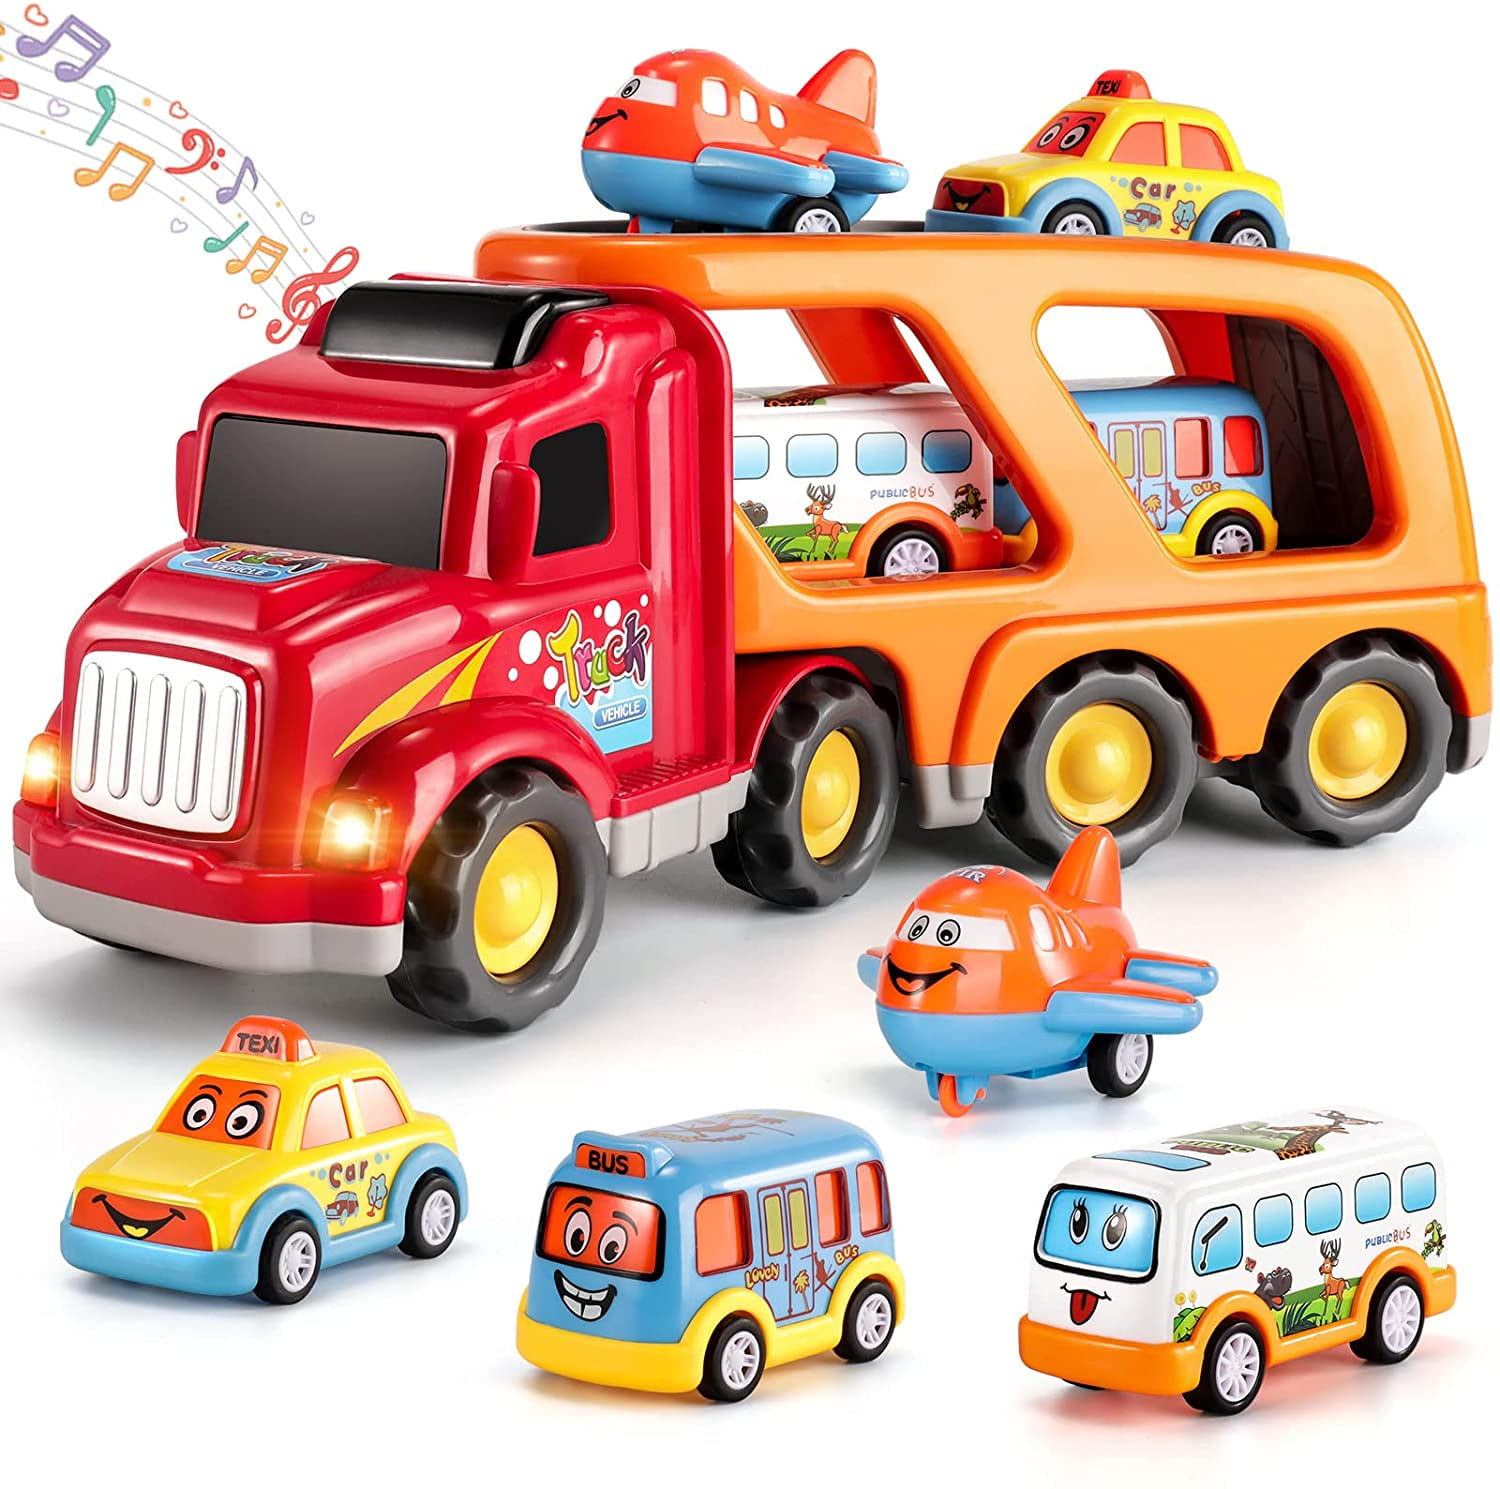 Police car Toys Whit Play Mat Push and Go Truck with Sound and Lights Die-cast Police Play Vehicle Set for Kids Toddlers Boys Child Gift Age 3 4 5 6 7 Years Old 